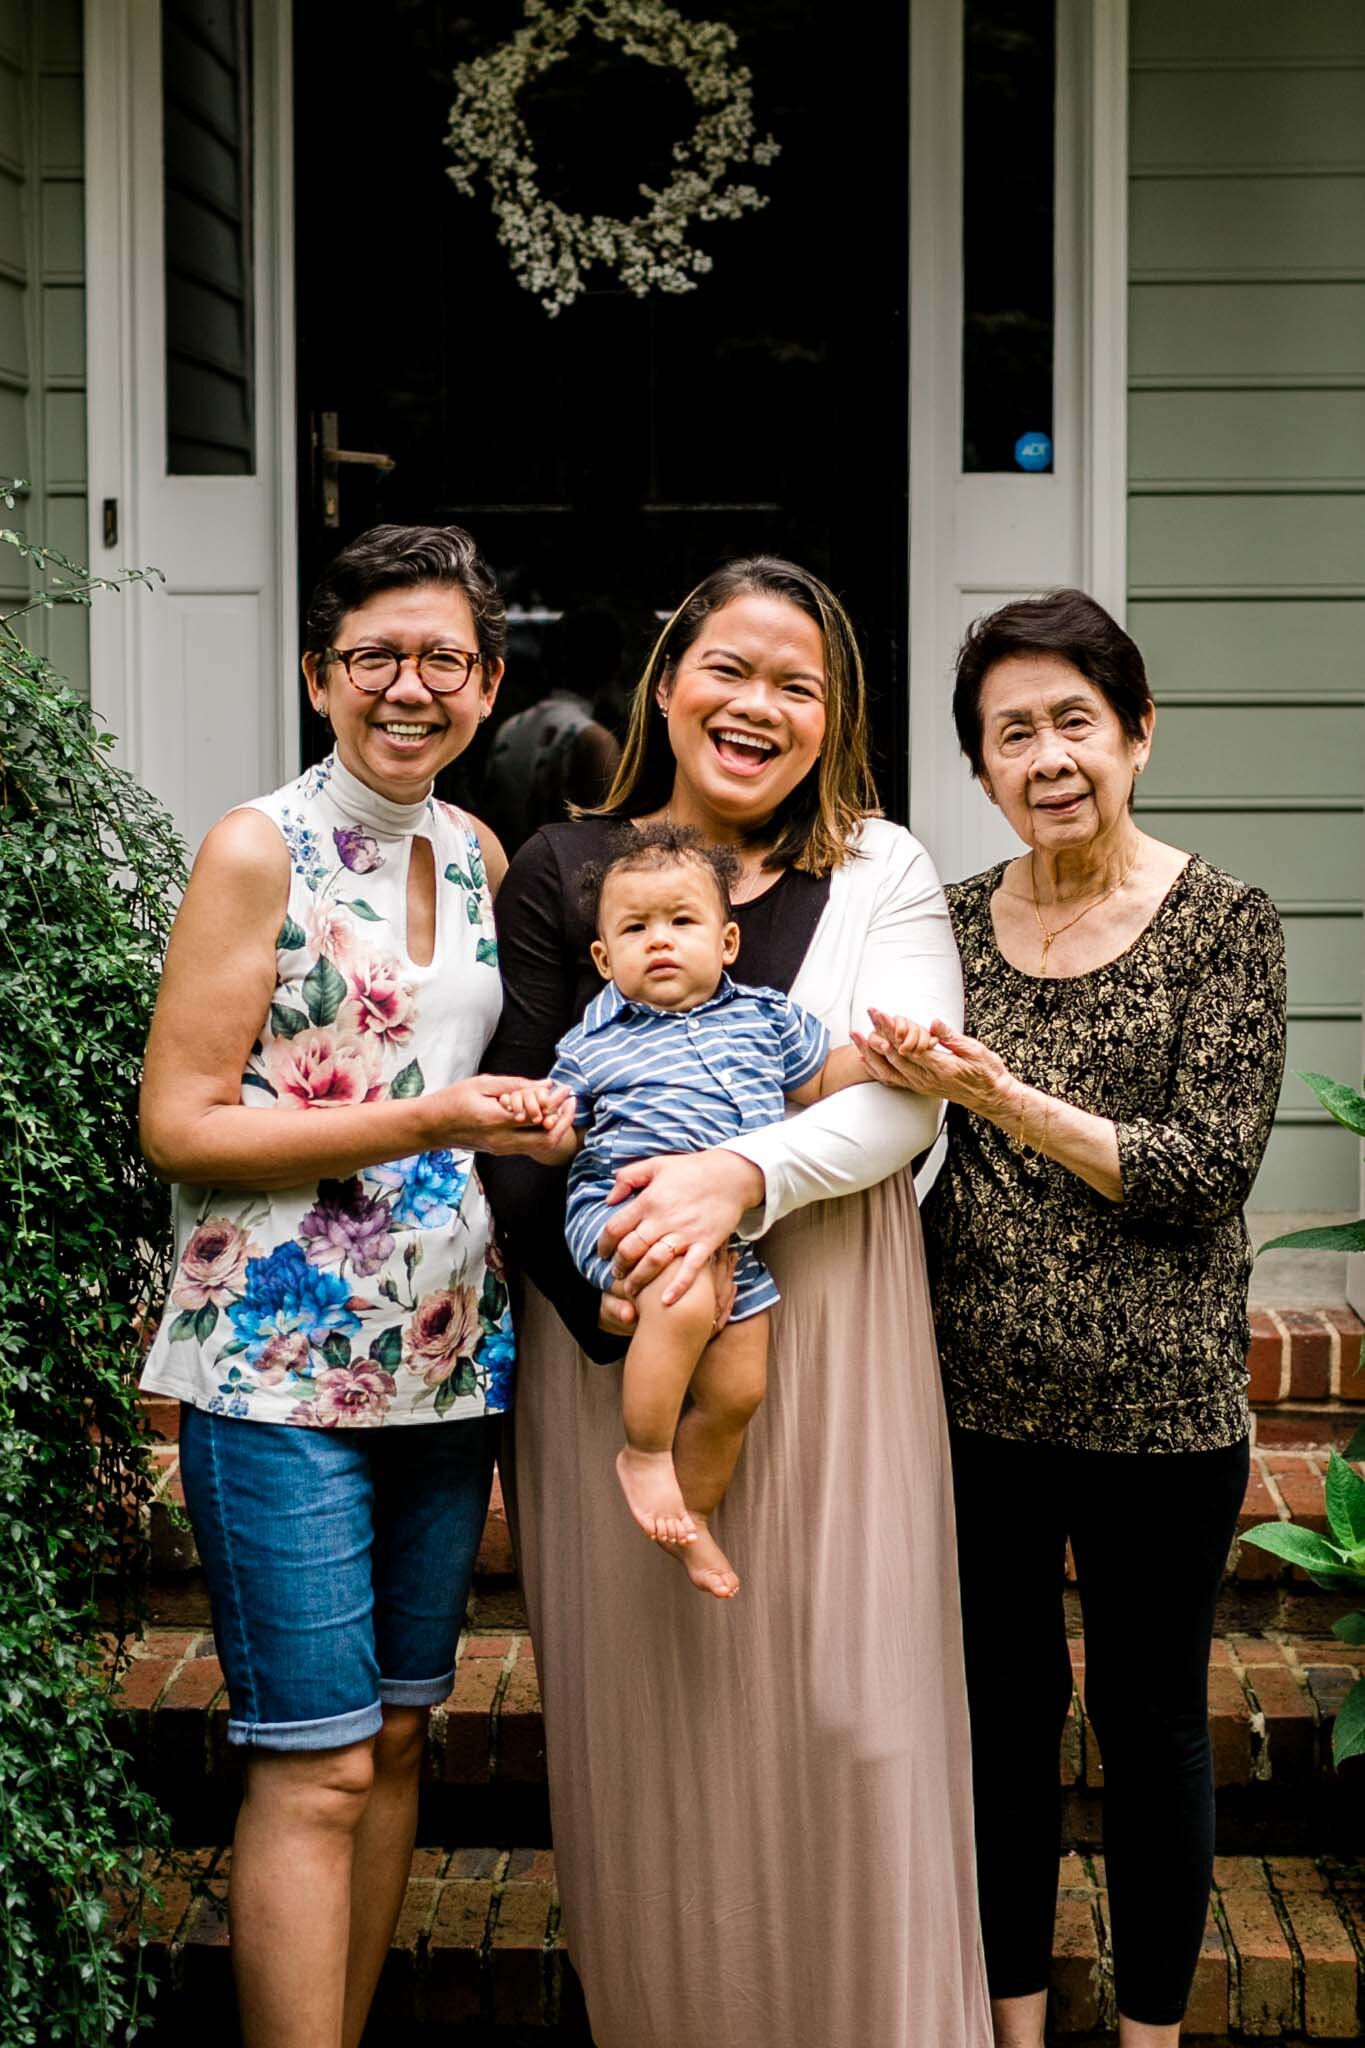 Raleigh Family Photographer | By G. Lin Photography | Candid portrait of family standing outside of home